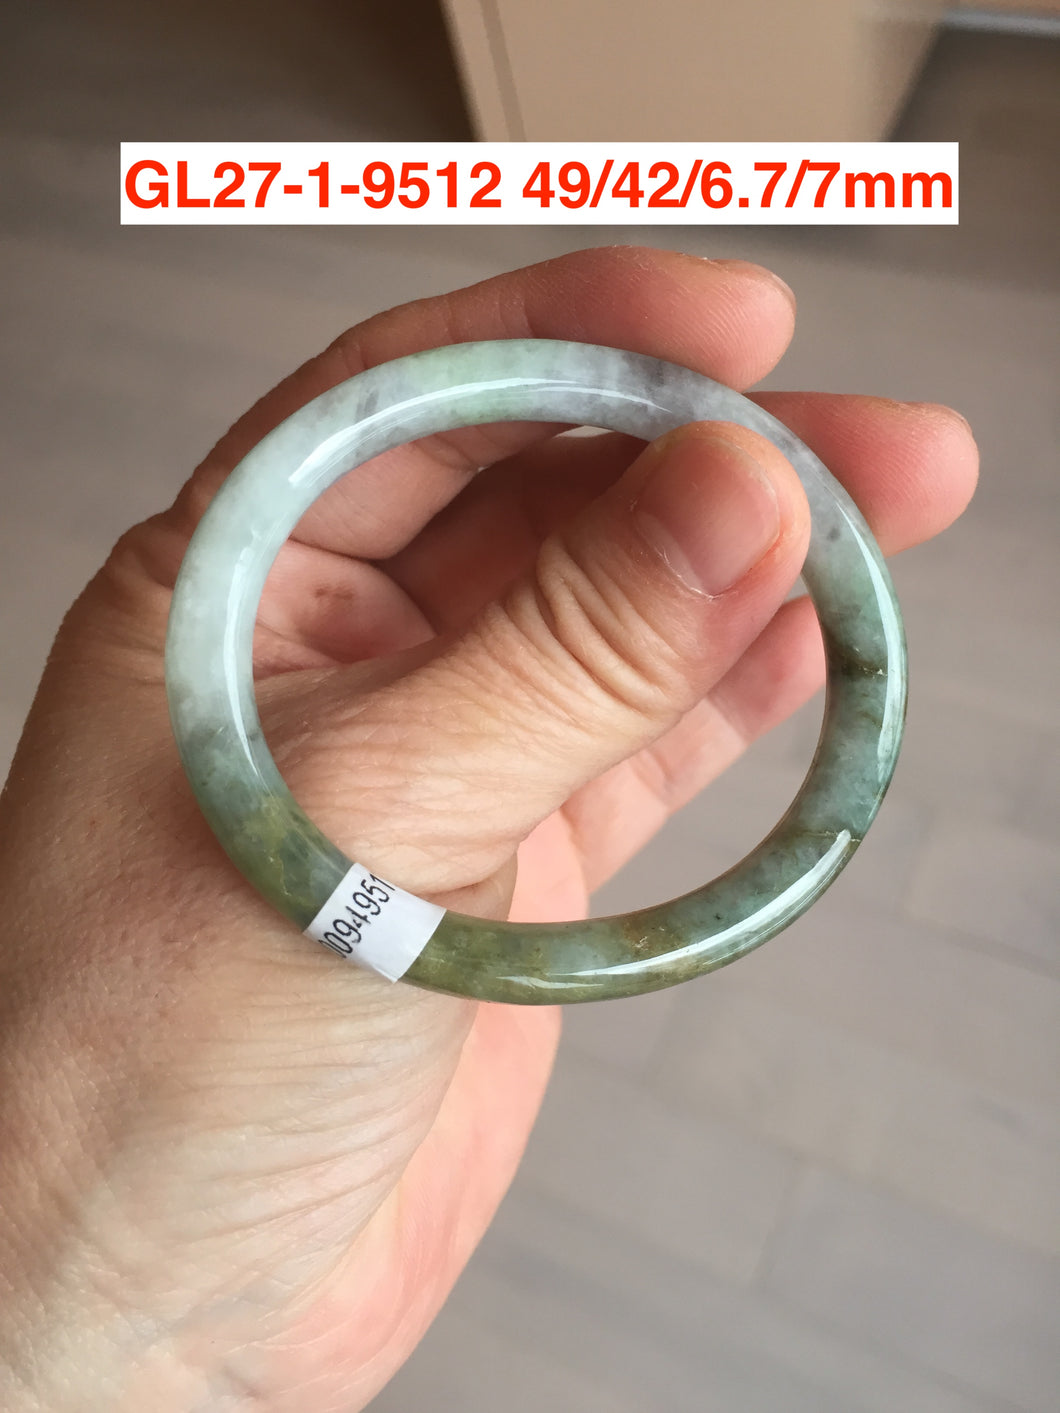 44-49.2 mm Type A 100% Natural light green/yellow/gray oval Jadeite Jade bangle group  for kids/small adult hand GL27 Add-on item.